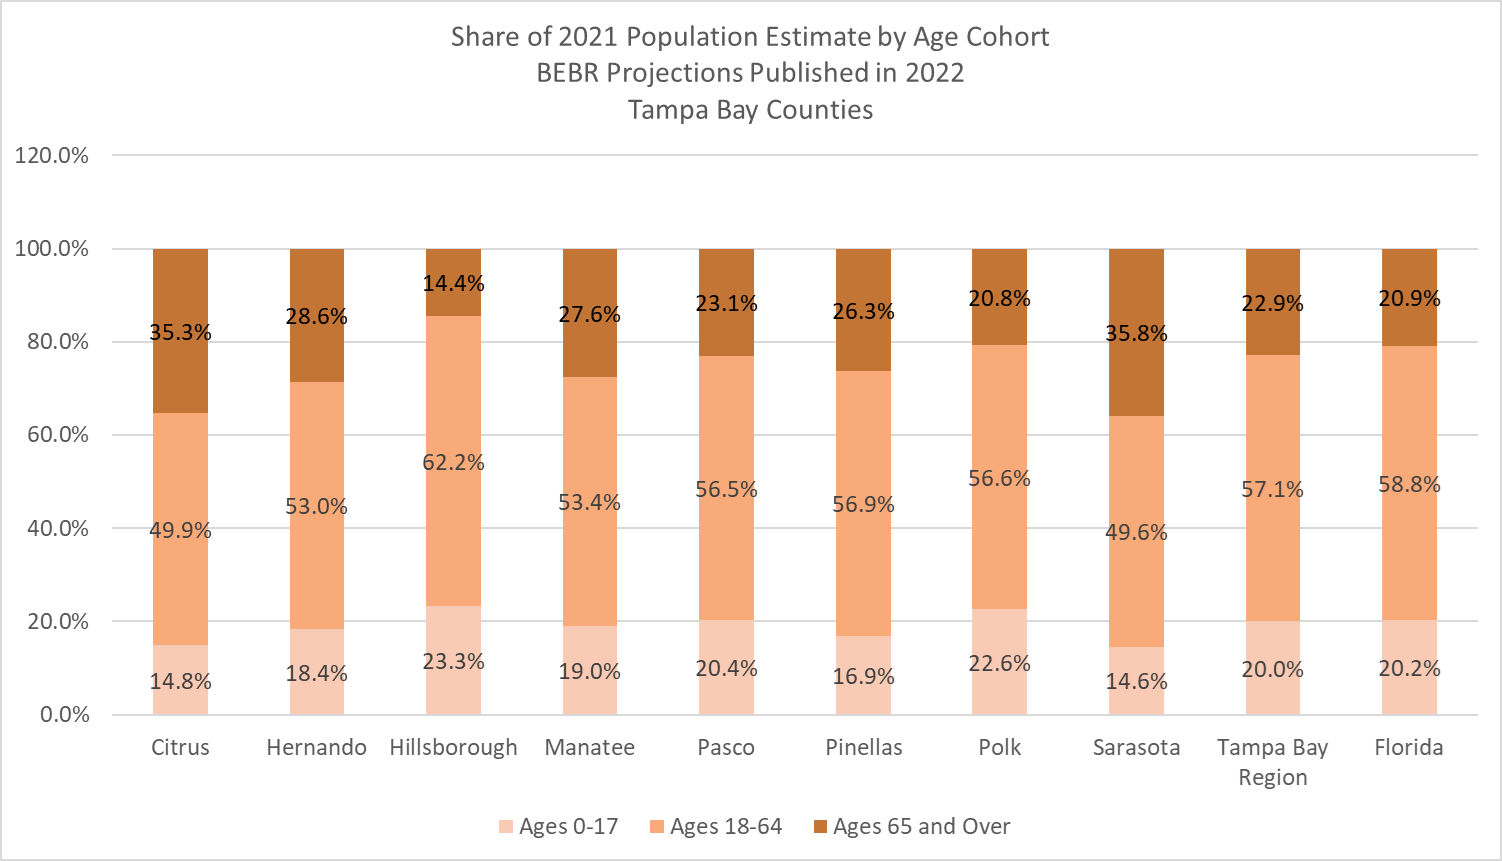 This chart shows share of 2021 population by age cohort for 8 Tampa Bay Region Counties: Citrus, Hernando, Hillsborough, Manatee, Pasco, Pinellas, Polk, and Sarasota. It also shows population shares by age cohort to the Tampa Bay Region and the all of Florida. The share of 2021 residents less than 17 years old averages 18.7%. It ranges from 14.6% in Sarasota County to 23.3% in Hillsborough County. The share of 2021 residents between 18 and 64 years old averages 54.8%. It ranges from 49.6% in Sarasota County to 62.2% in Hillsborough County. Lastly, the share of 2021 residents over 65 years old averages 26.5%. It ranges from 14.4% in Hillsborough County to 35.8% in Sarasota County.